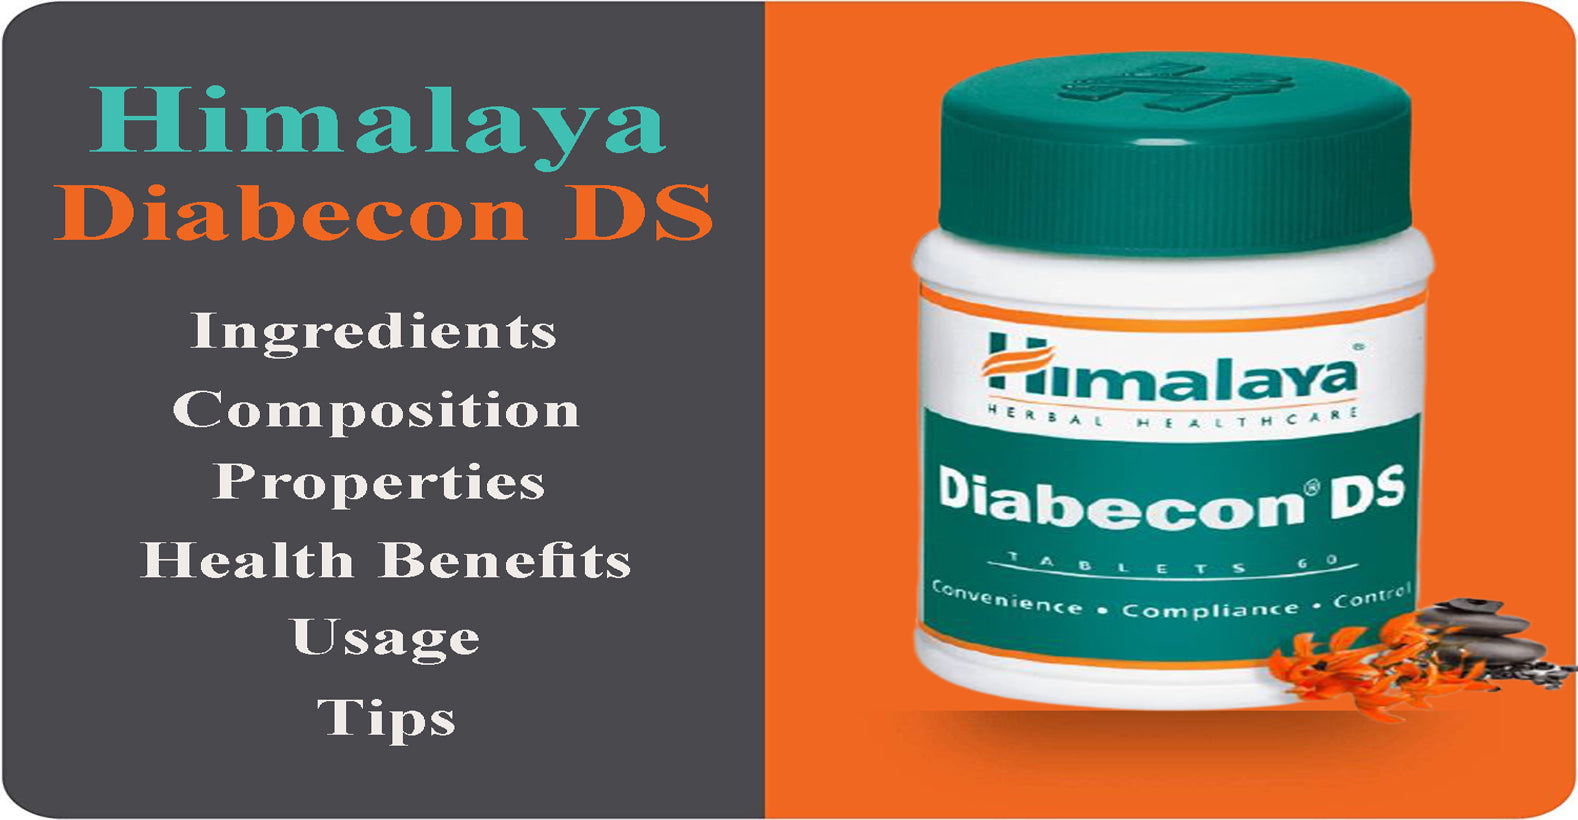 Himalaya Herbals - Diabecon (DS) Tablets - Ingredients, Composition, Properties, Health Benefits, Usage, Tips